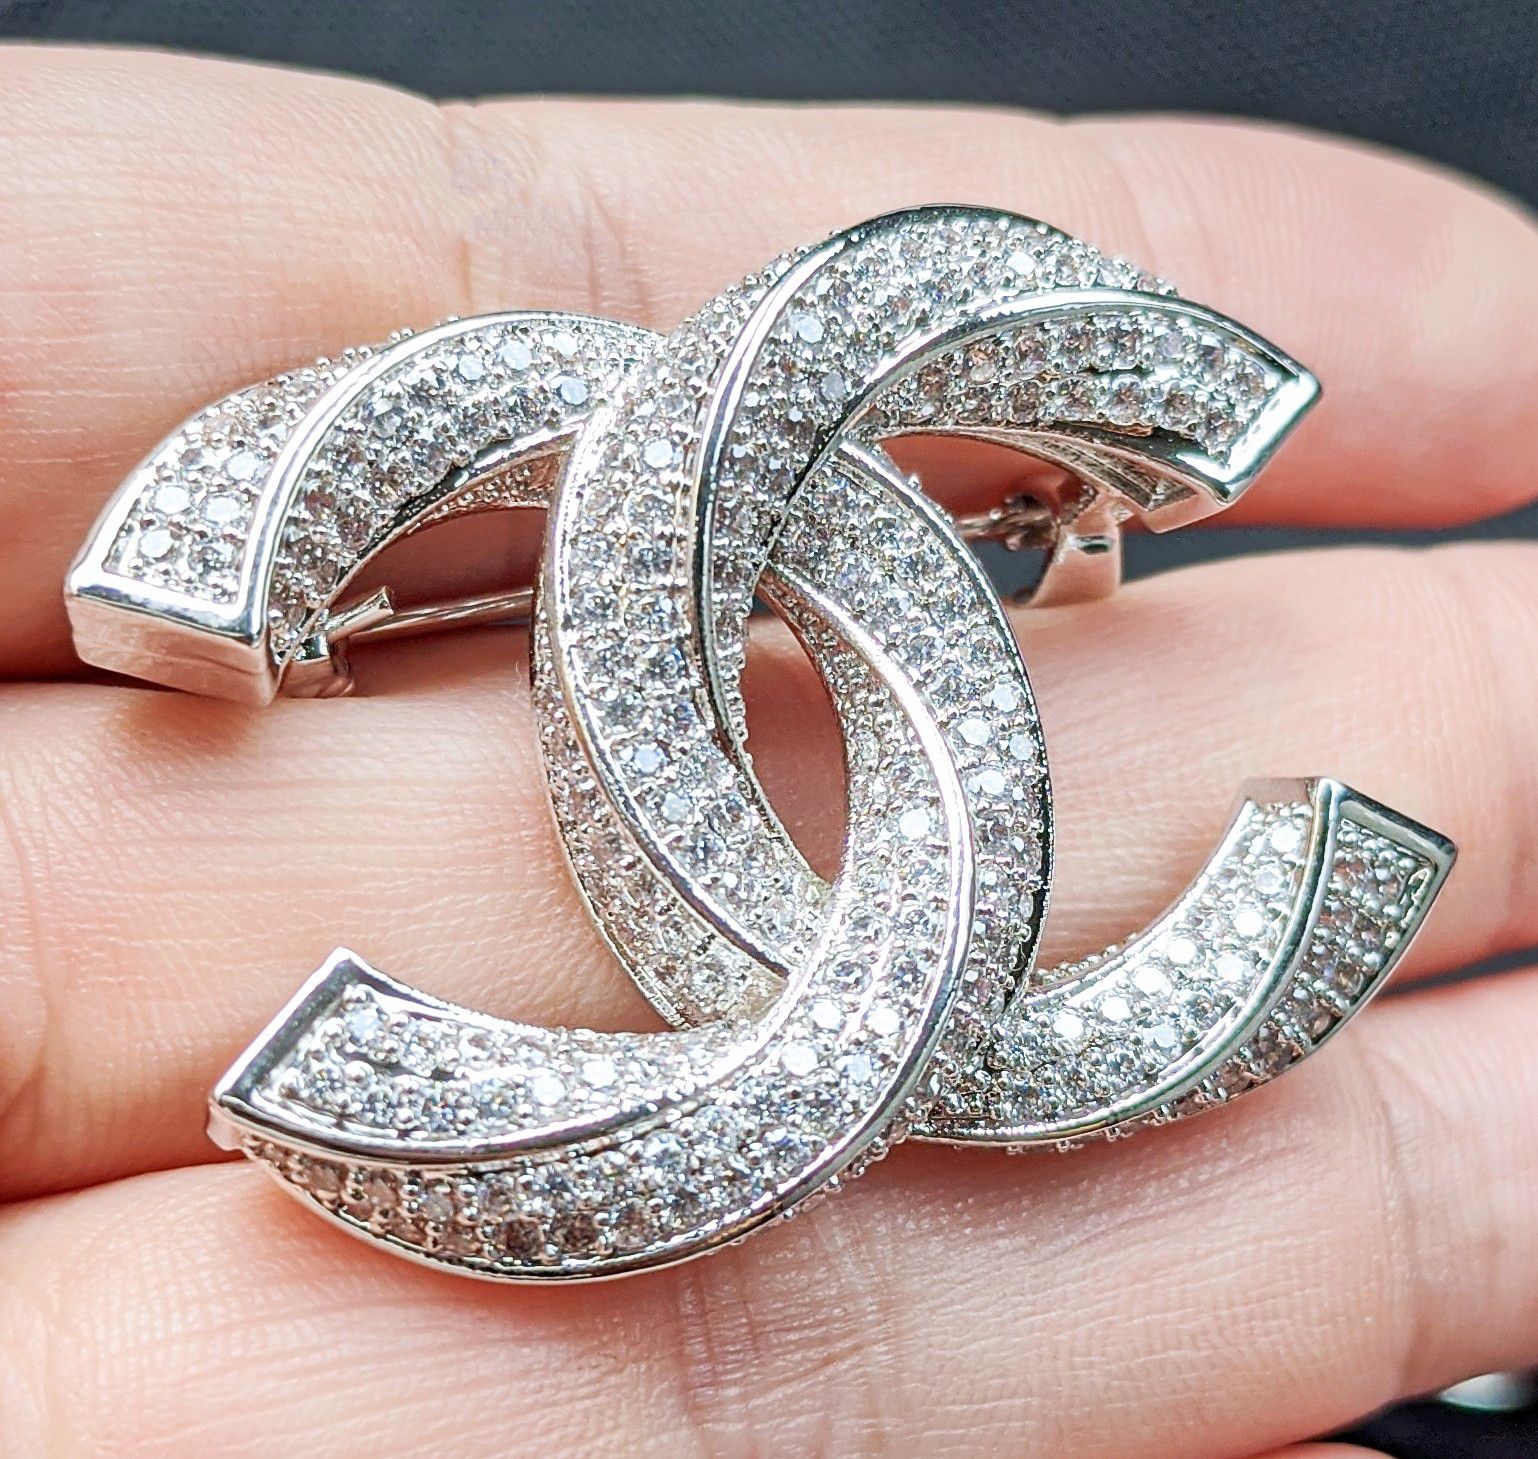 New silver tone crystals filled brooch